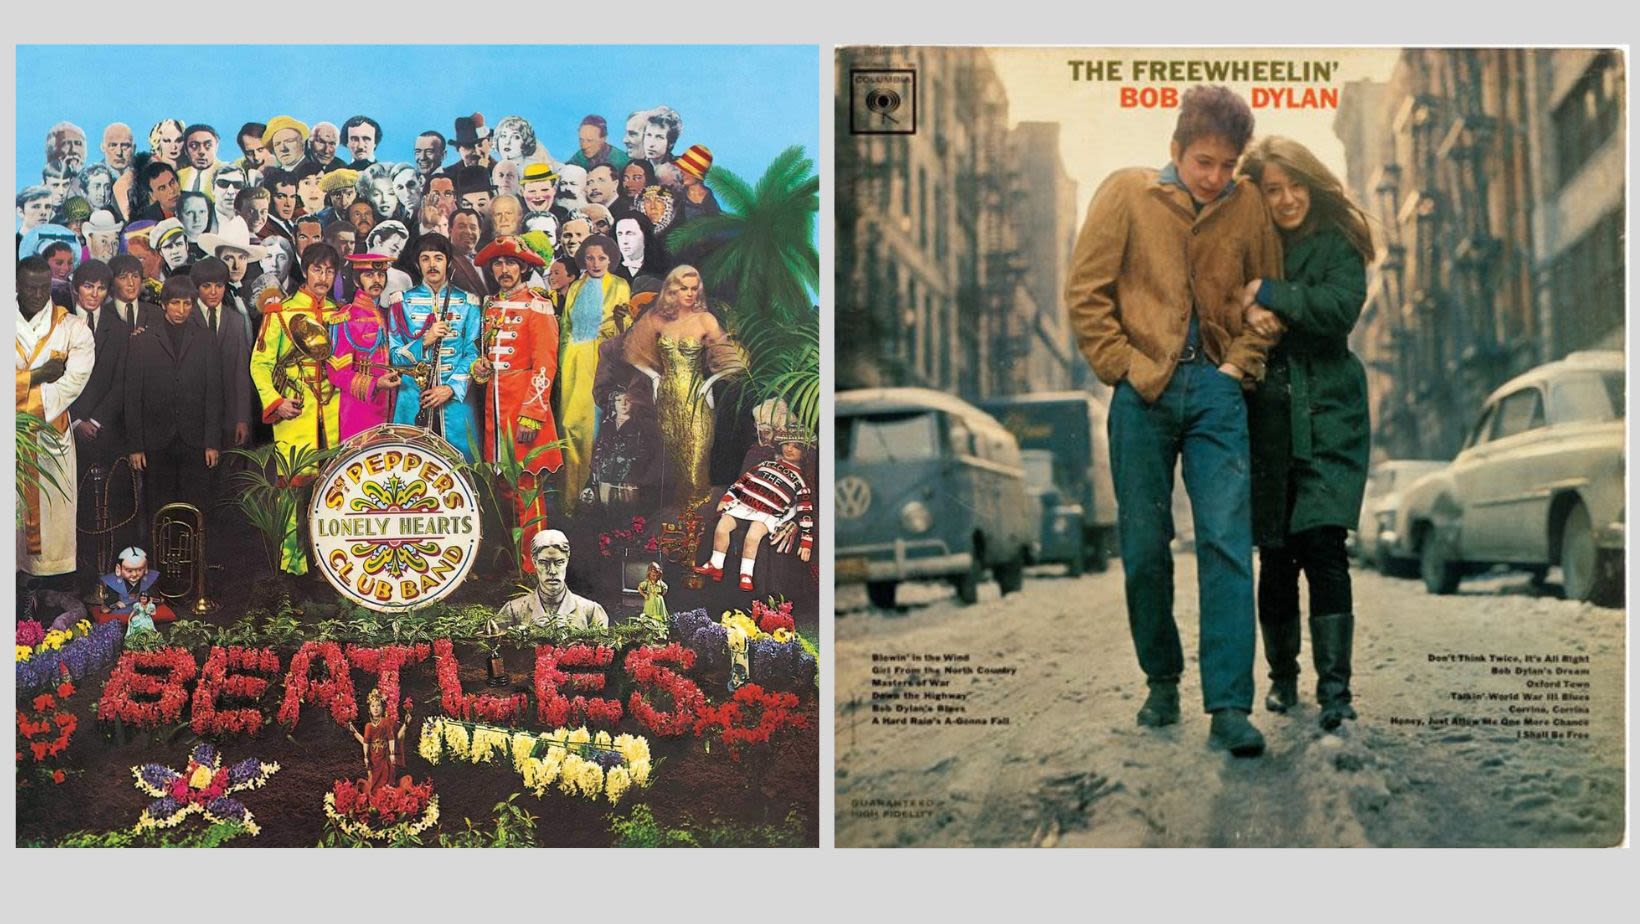 10 Vinyl Records You Might Own That Are Now Worth an Absolute Fortune